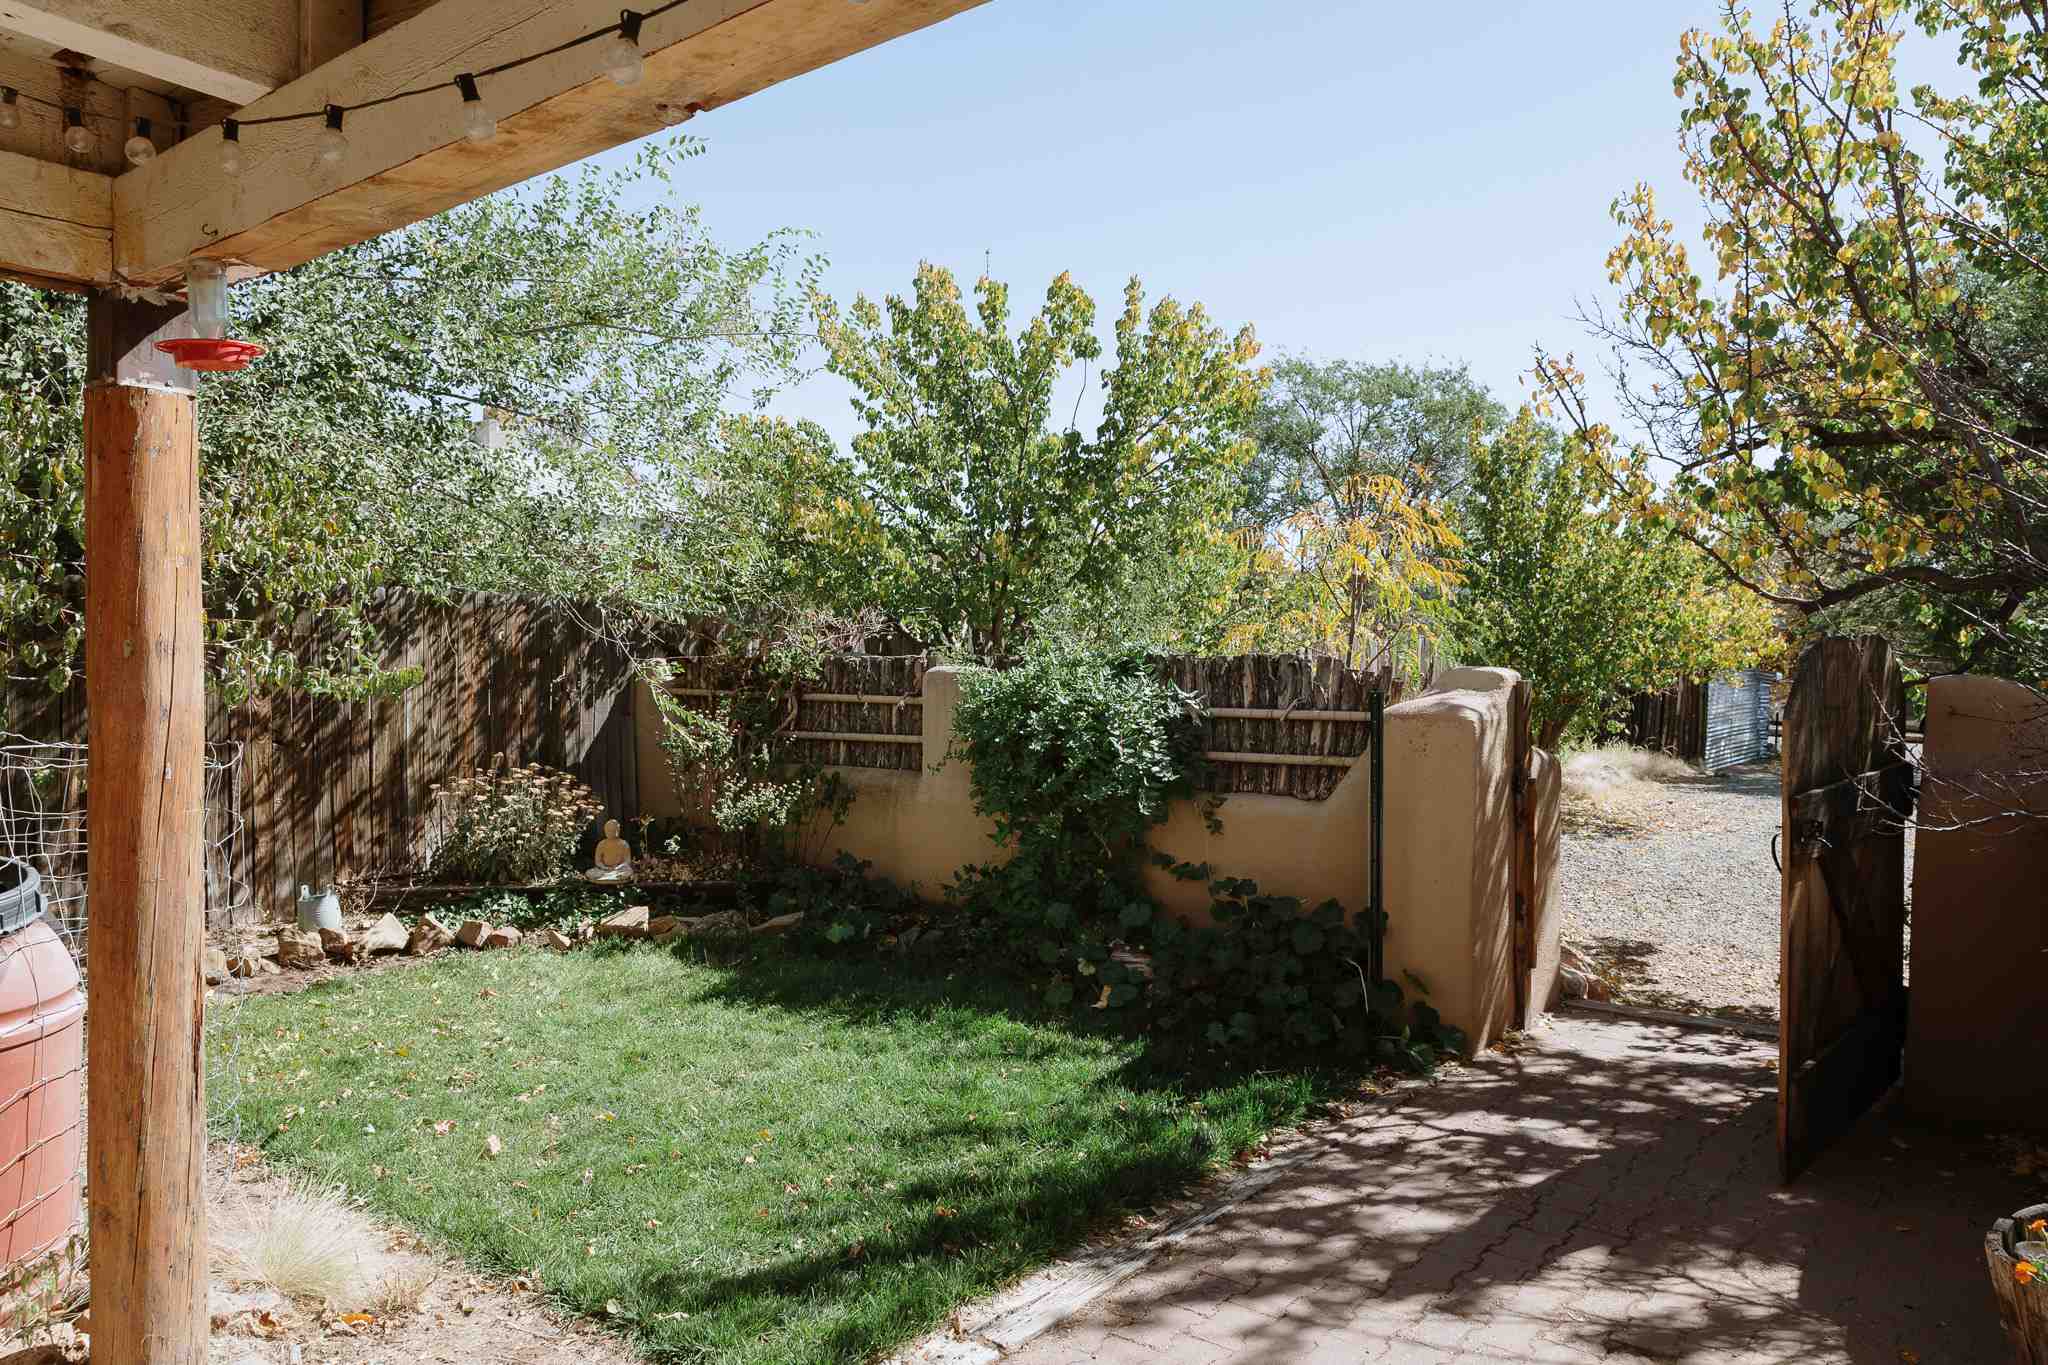 1841 Mann, Santa Fe, New Mexico 87505, 3 Bedrooms Bedrooms, ,1 BathroomBathrooms,Residential,For Sale,1841 Mann,202101171